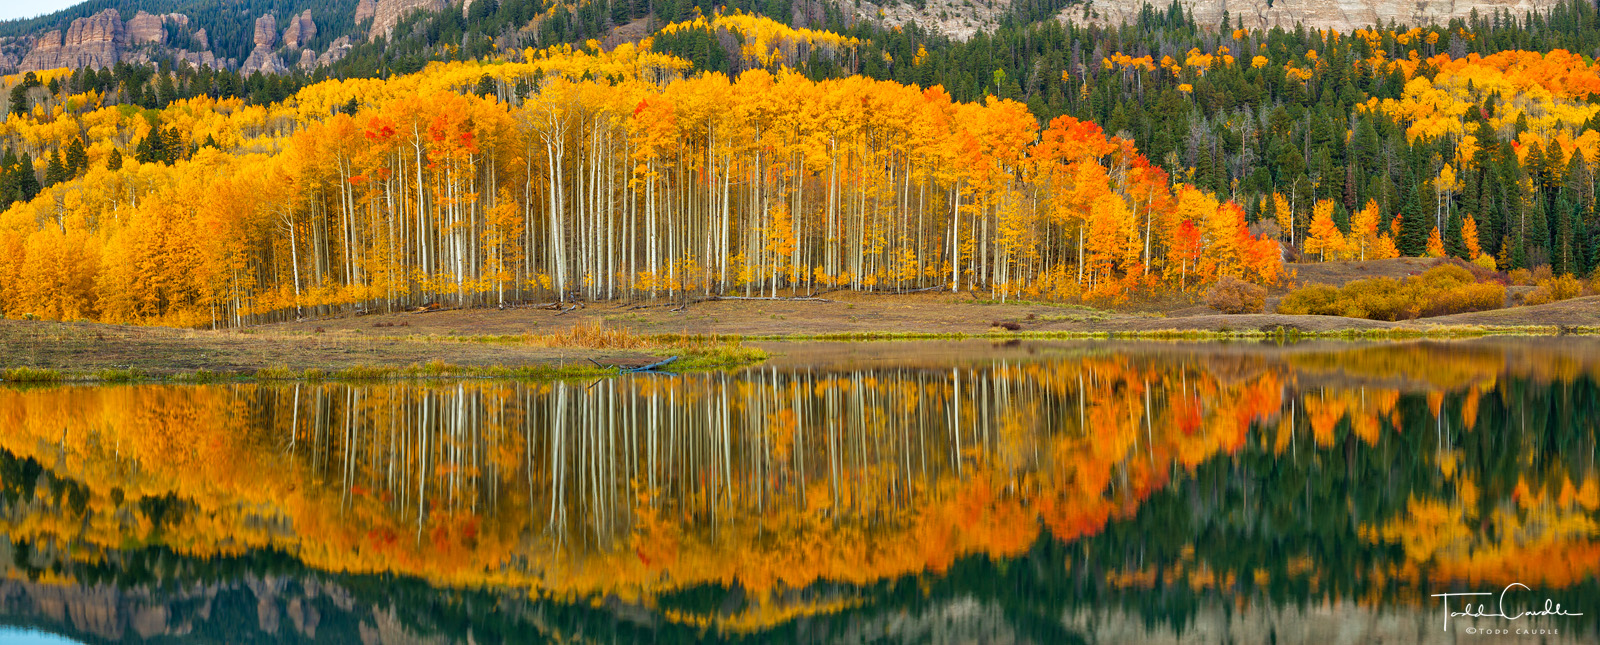 A small lake in the Cimarron Range reflects a perfect stand of aspens.